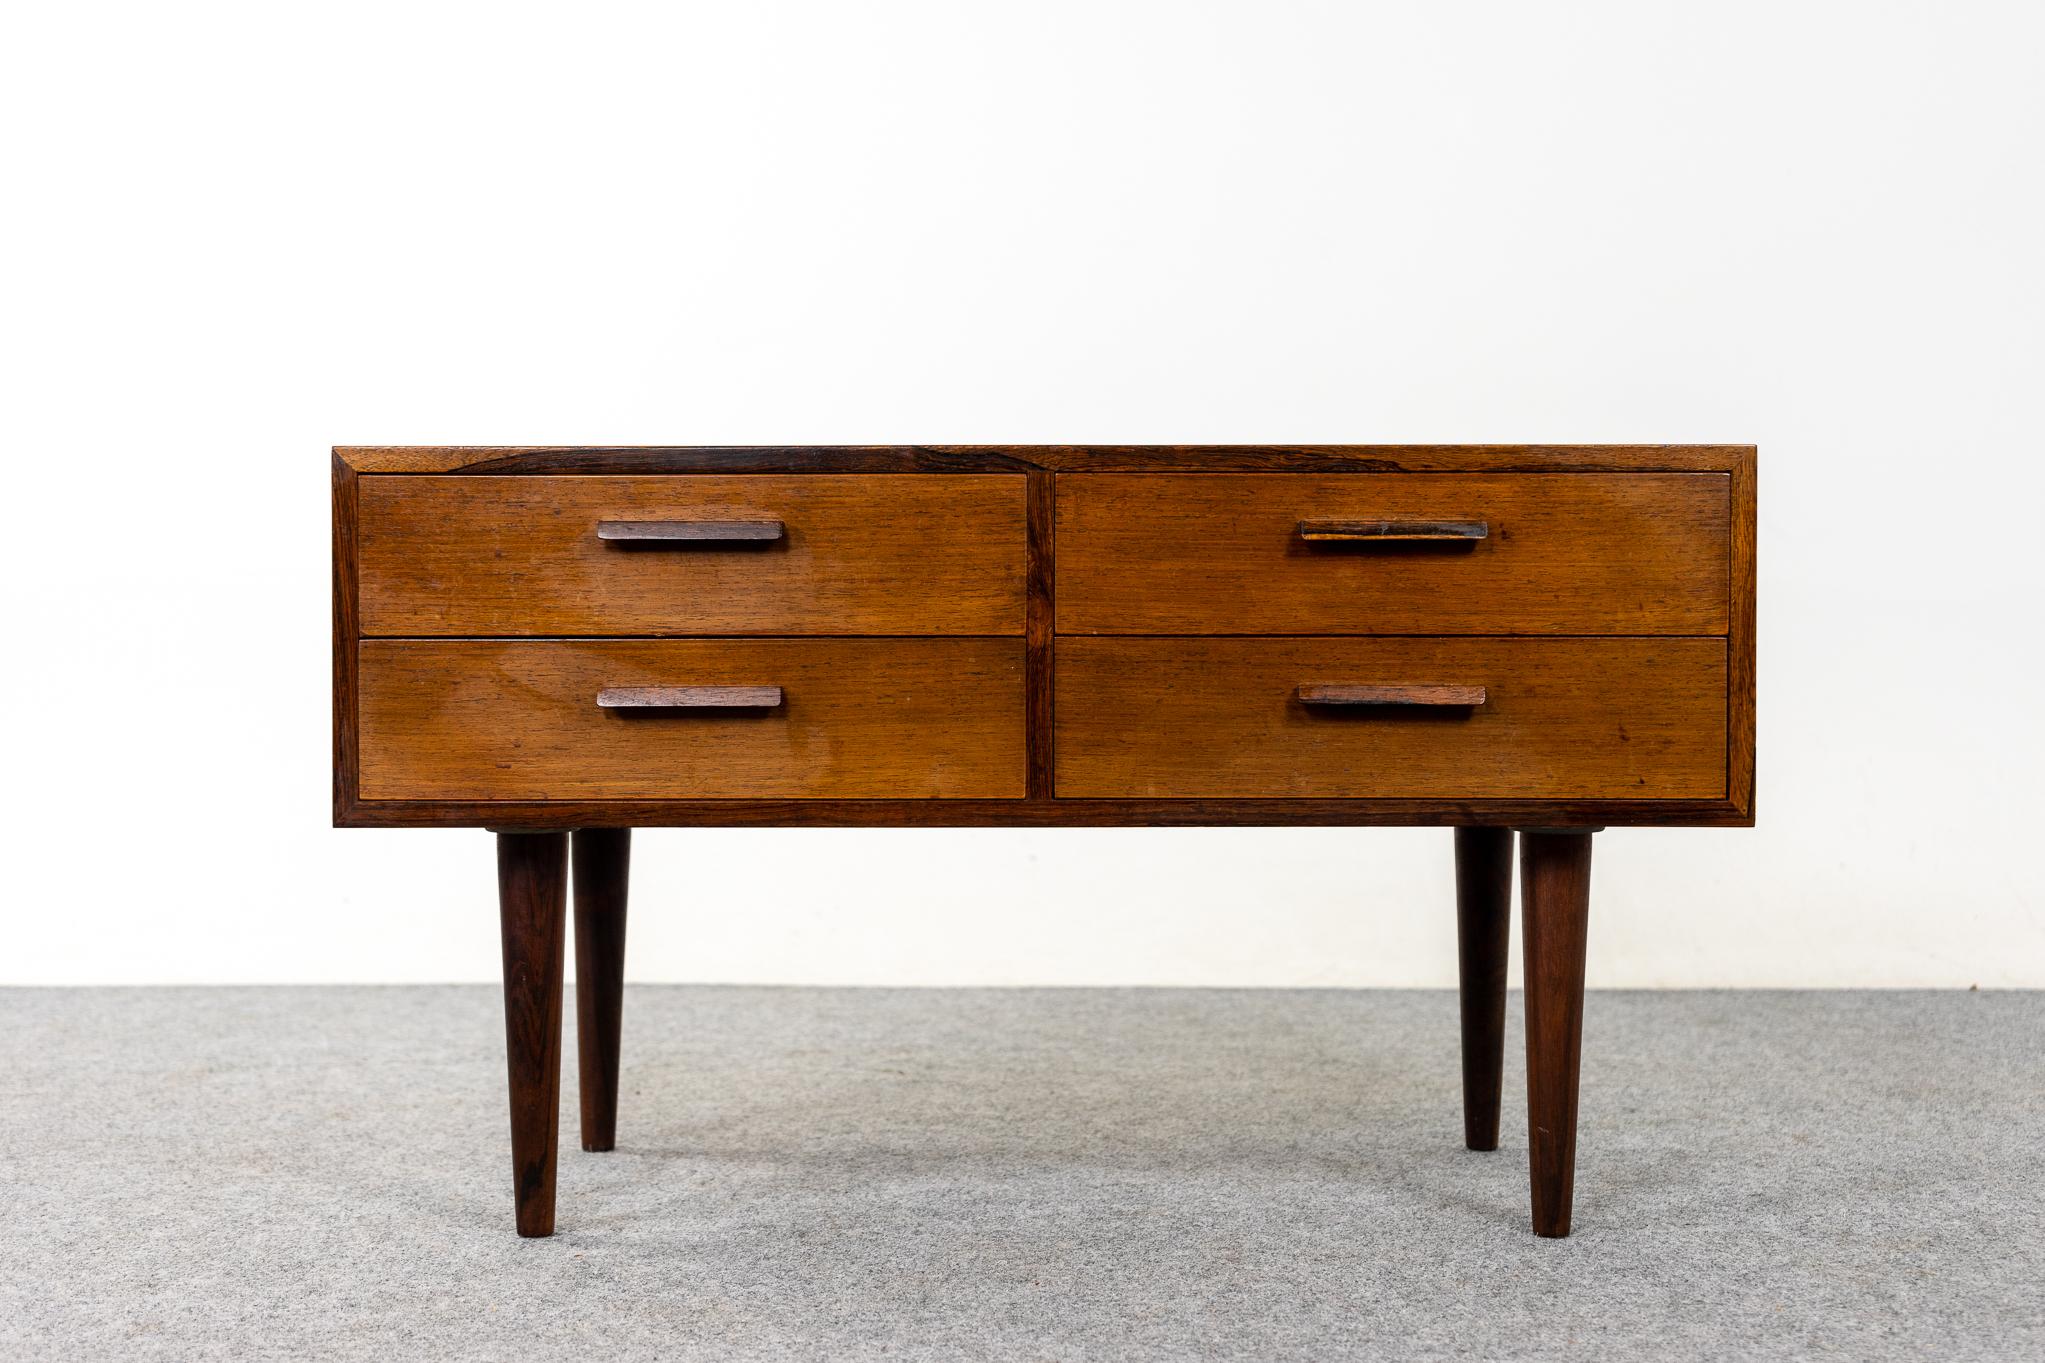 Rosewood Danish bedside table, circa 1960's. Beautifully veneered case rests on slender, tapered, removable legs. Four slim dovetailed drawers offer storage for small items.

Unrestored item, some marks consistent with age, small holes on